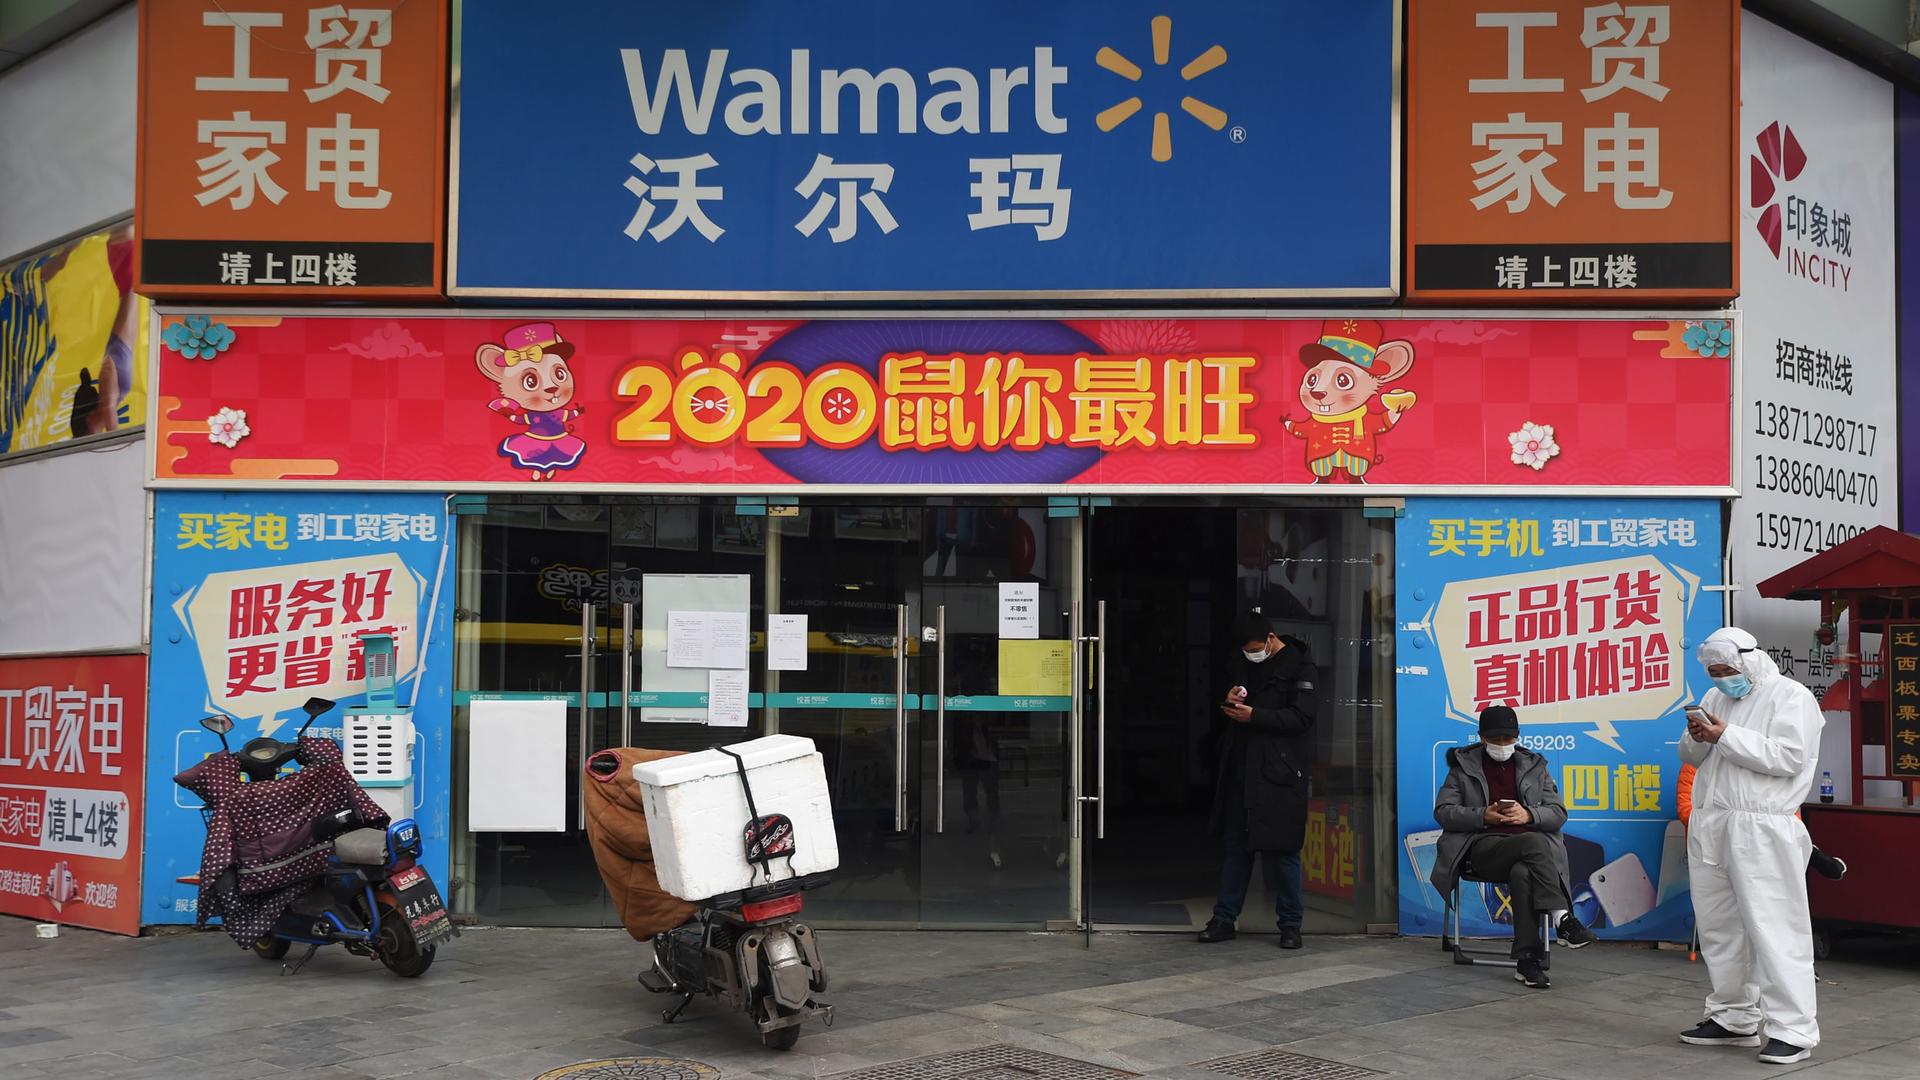 A colorful entrance to a Walmart in Wuhan, China, is shown with several advertisements and two men nearby wearing face masks.